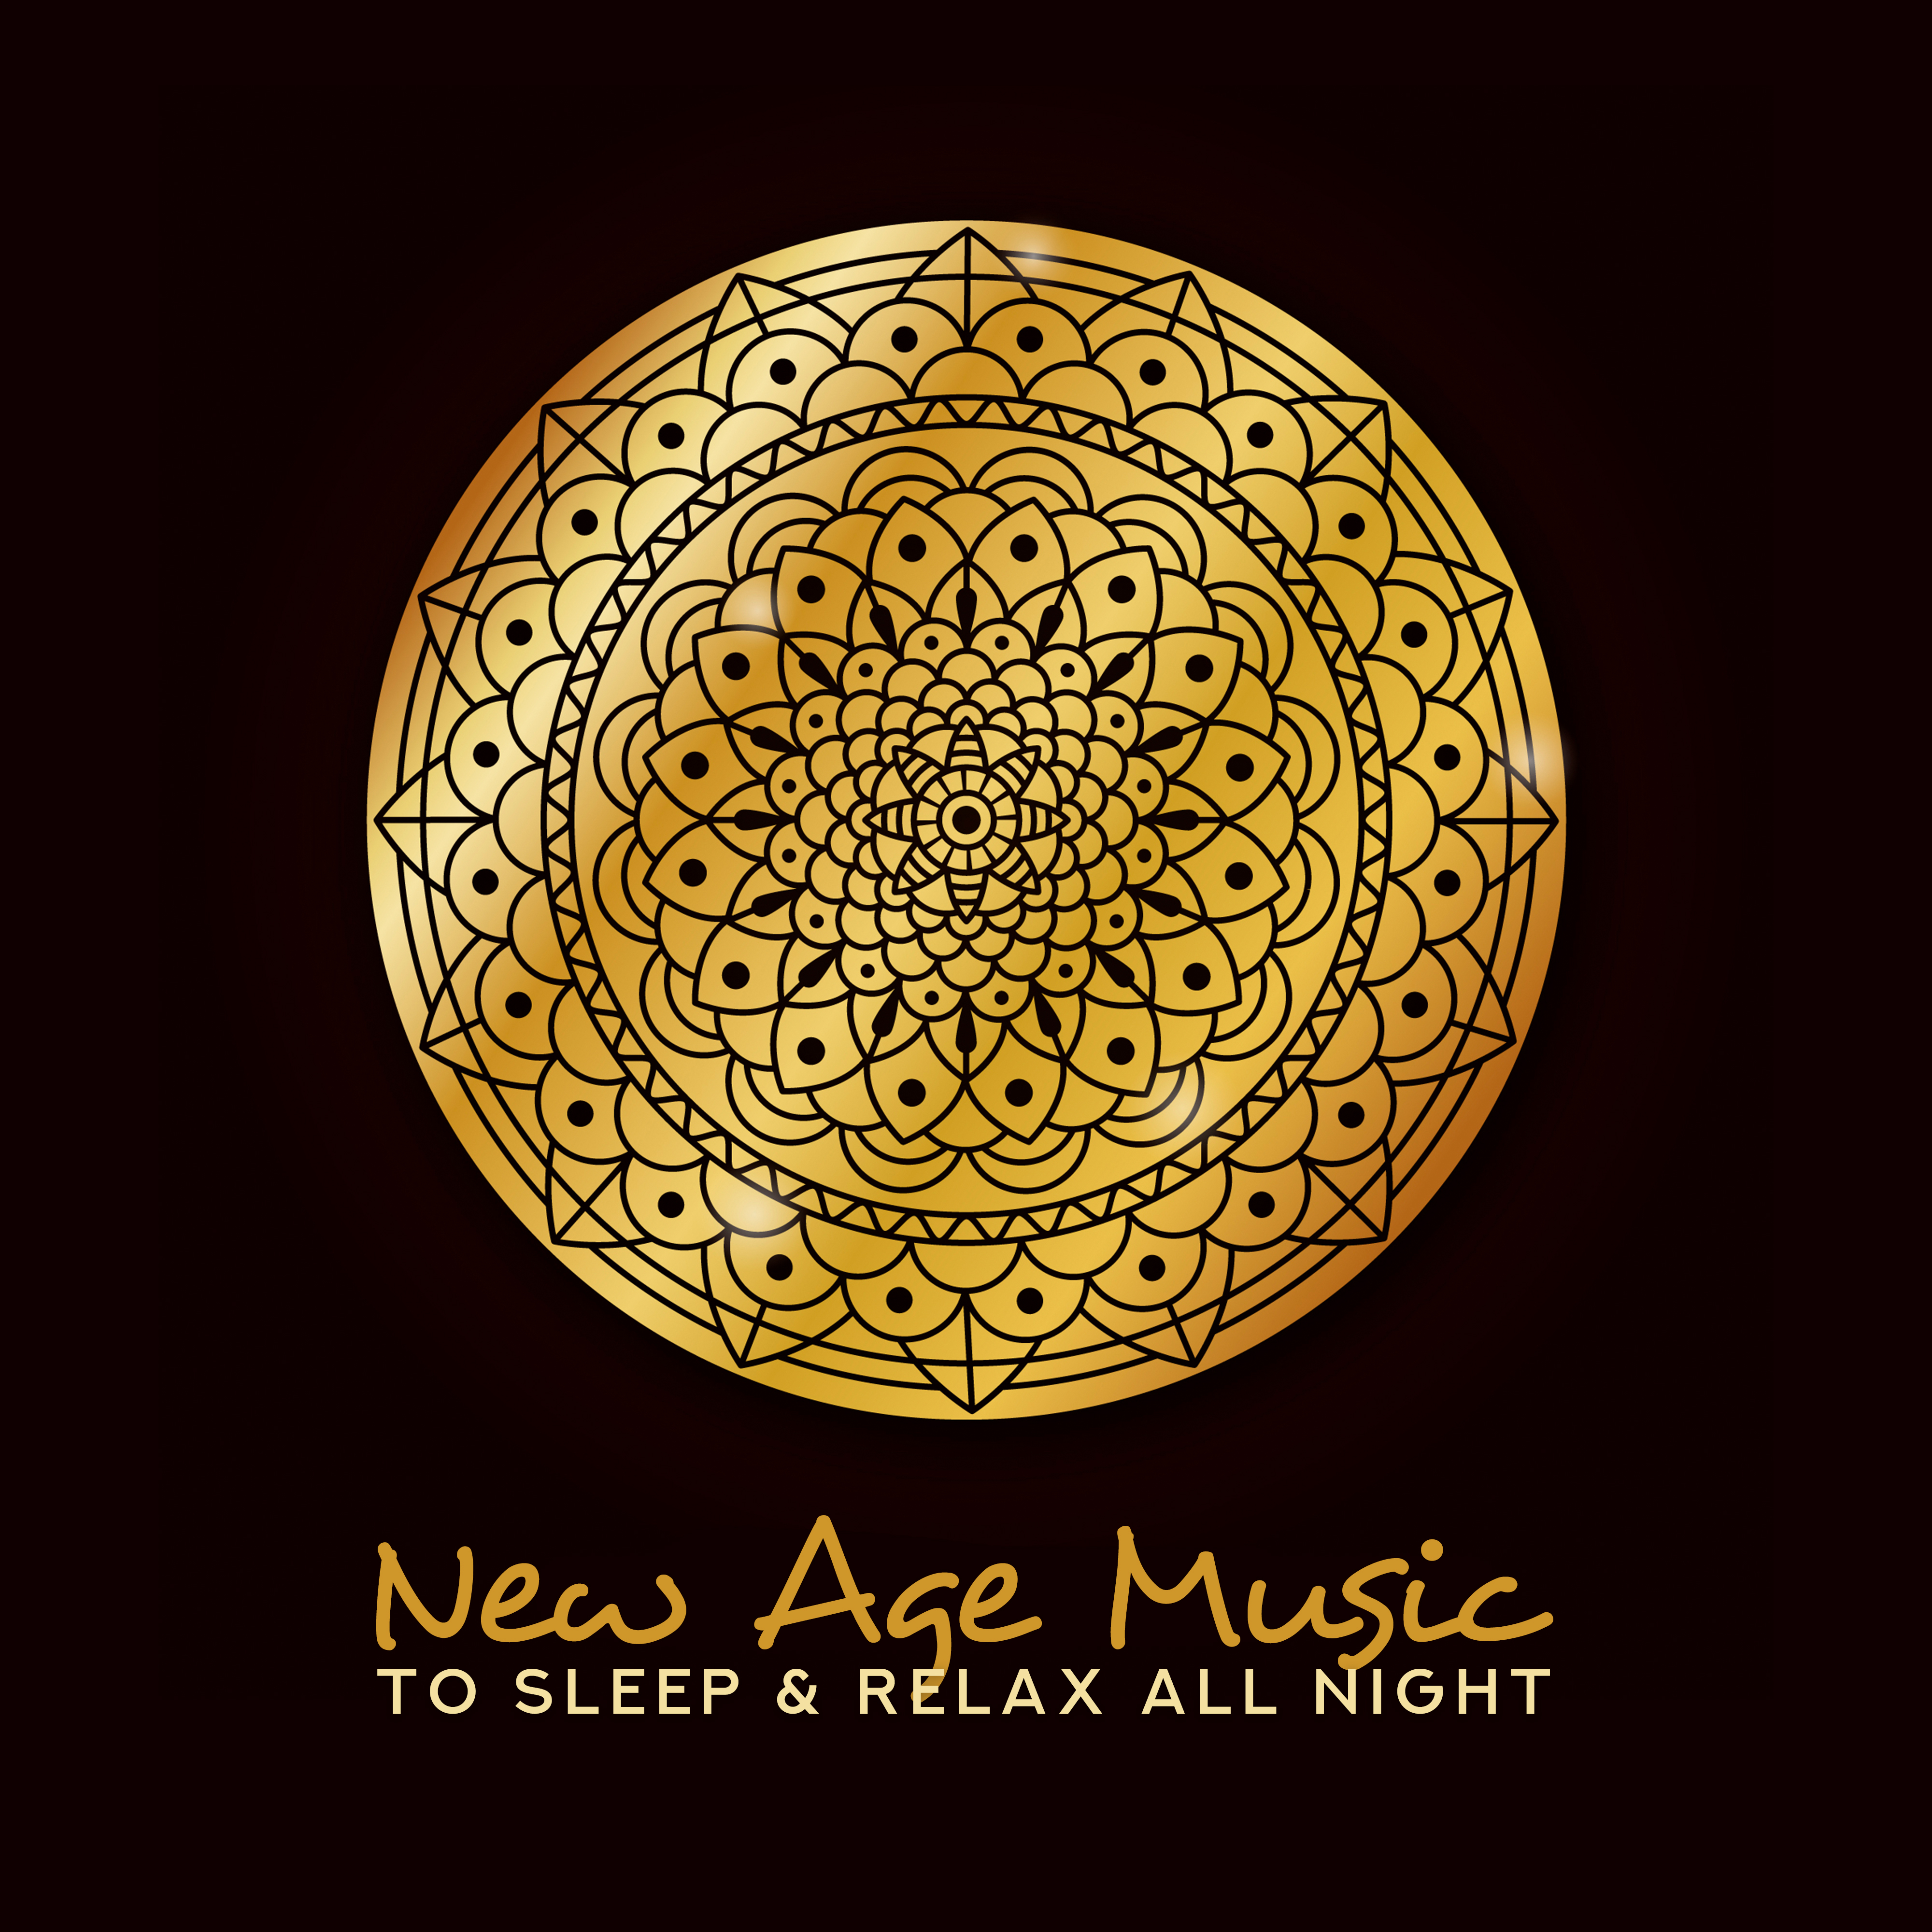 New Age Music to Sleep & Relax All Night